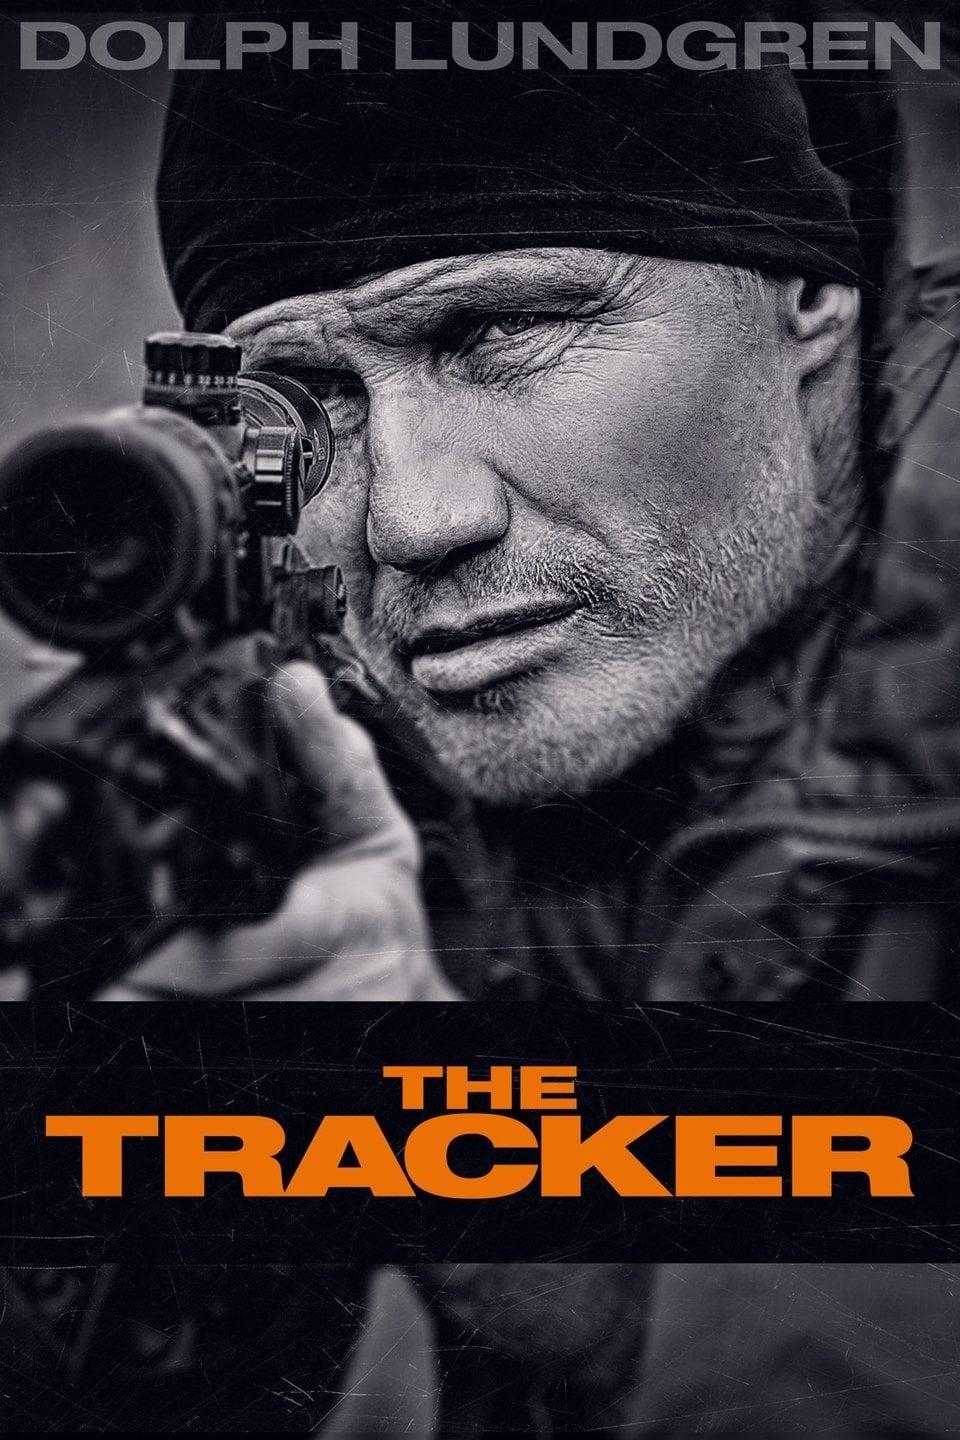 The Tracker poster